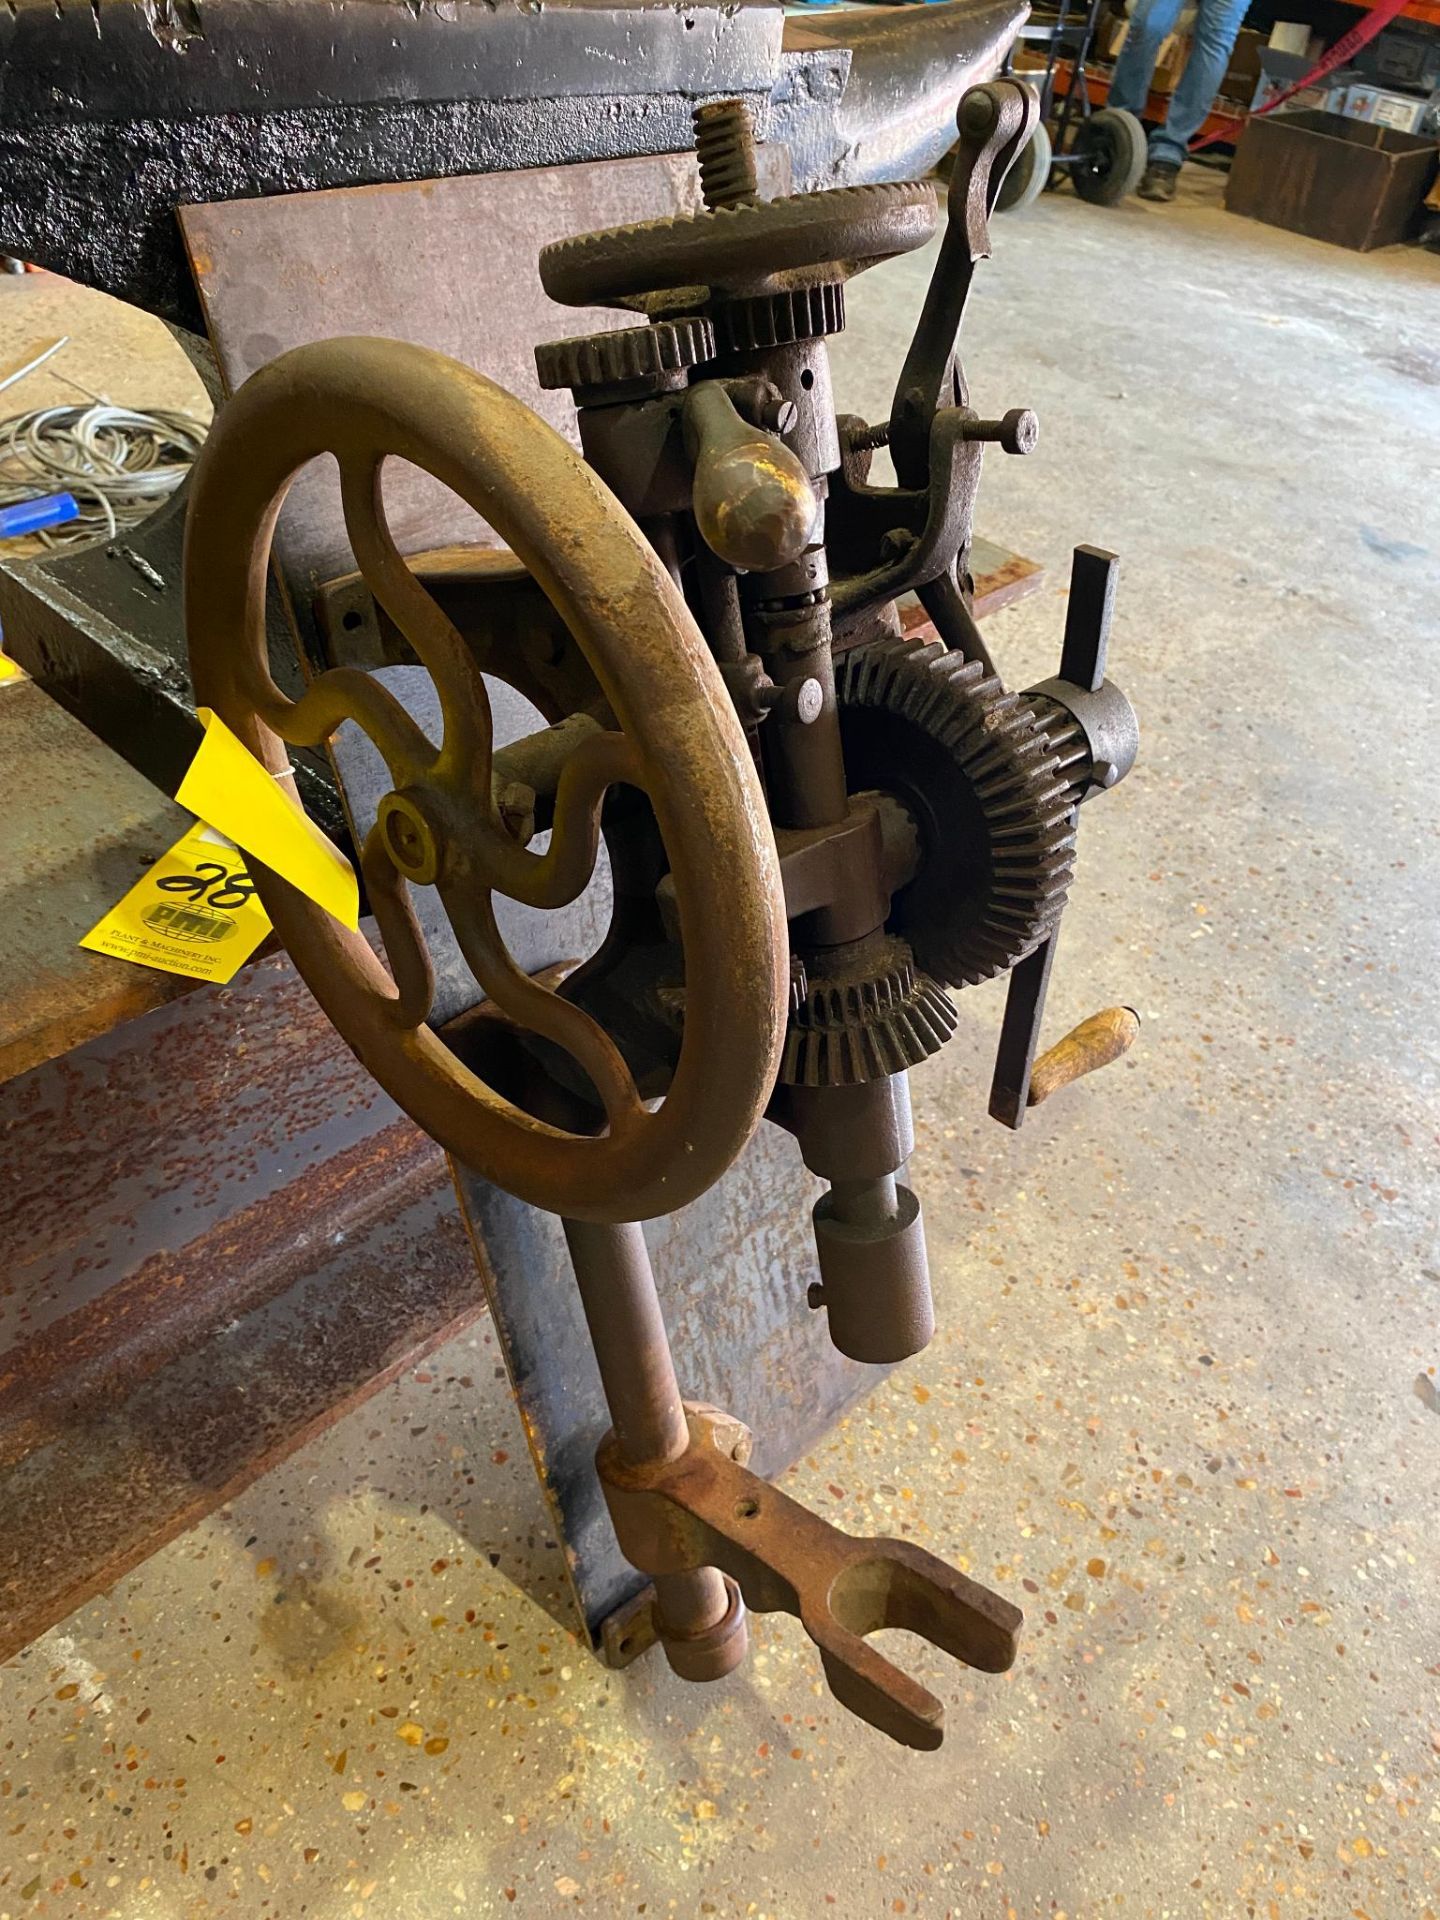 HAND CRANK POST WALL DRILL PRESS, MFG. WARRENTED, antique (Located at: Tri R Erecting, 26535 FM 2978 - Image 2 of 6